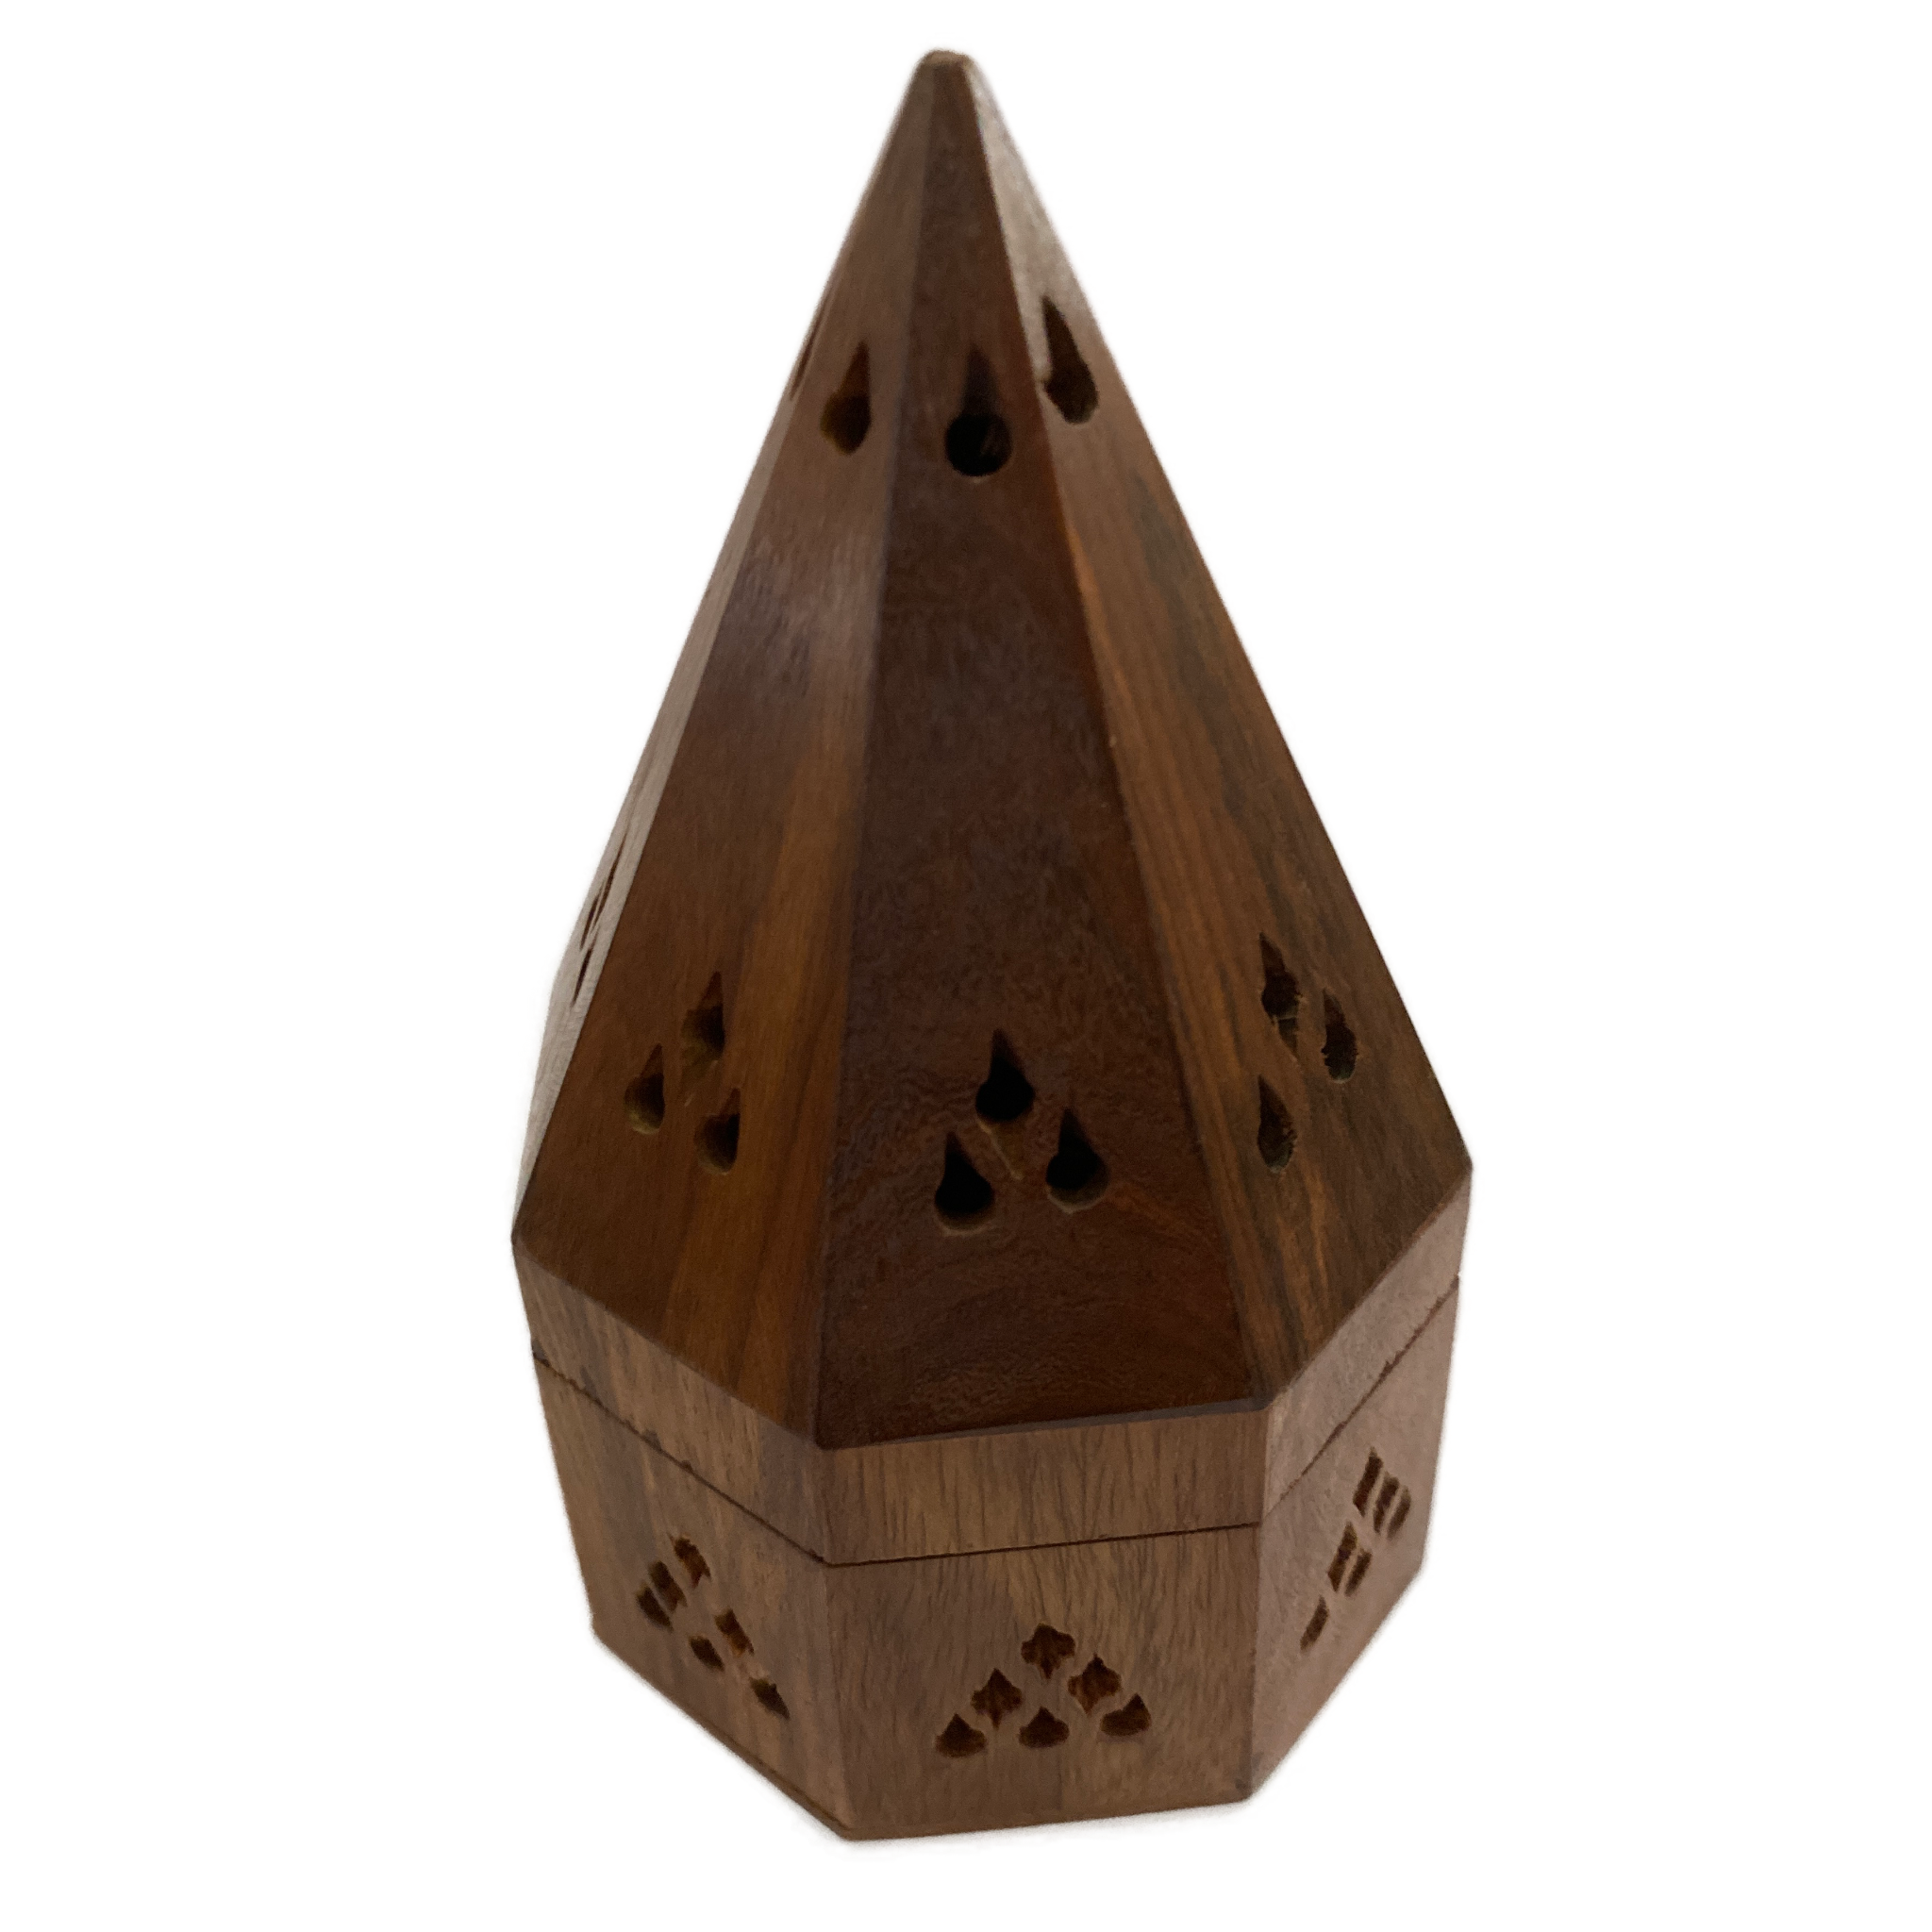 8 sided wooden burner with. cone shaped top 